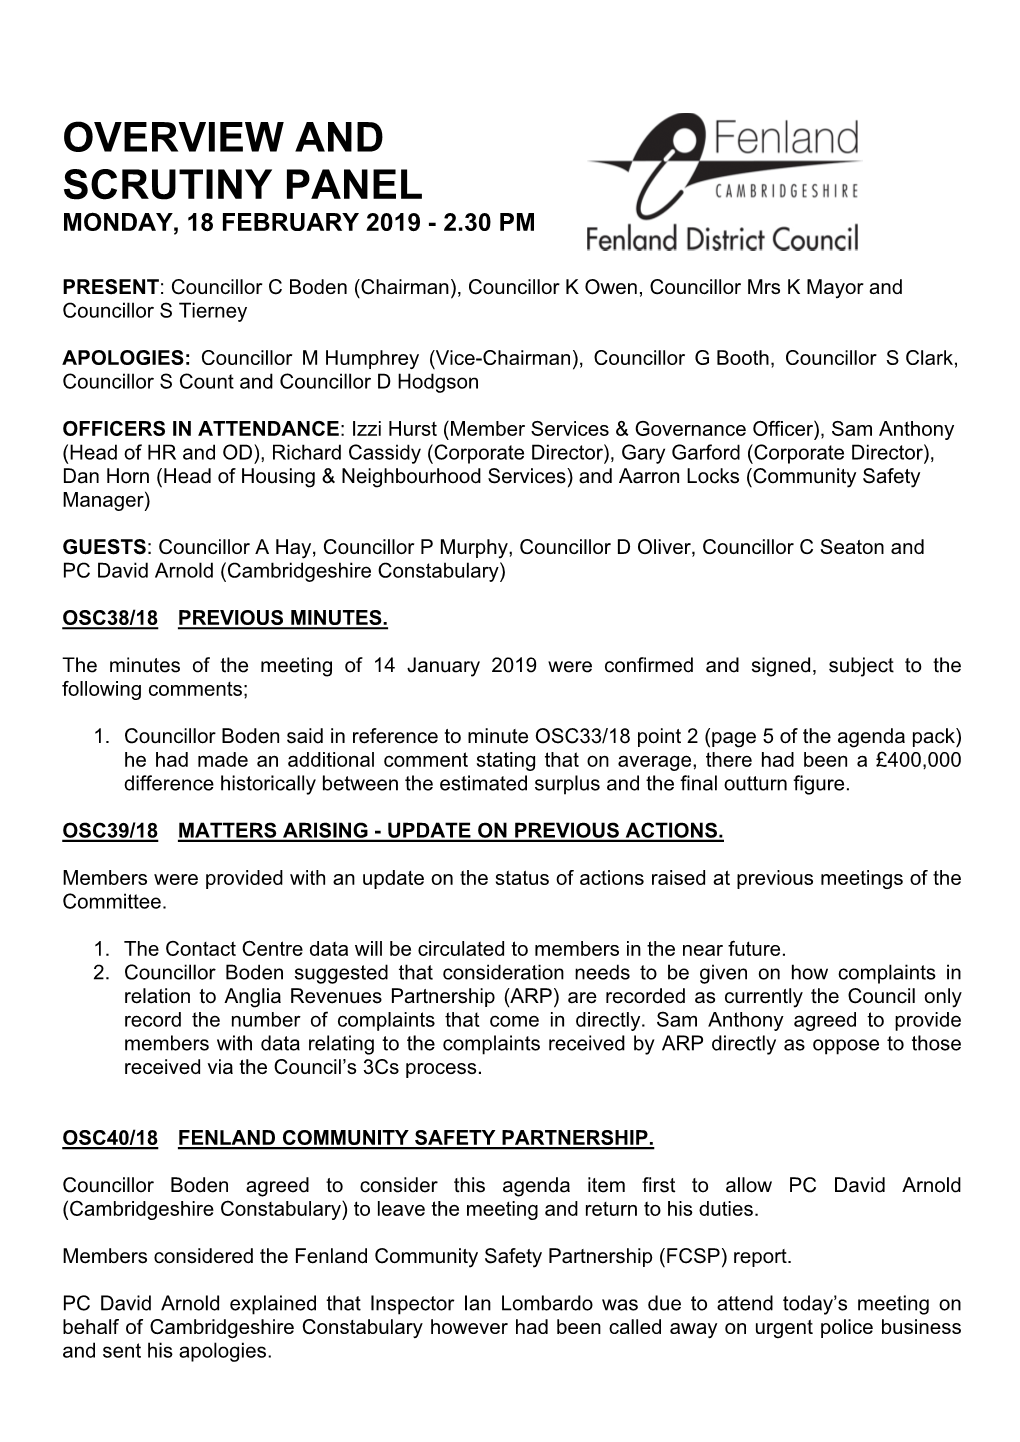 Overview and Scrutiny Panel Monday, 18 February 2019 - 2.30 Pm